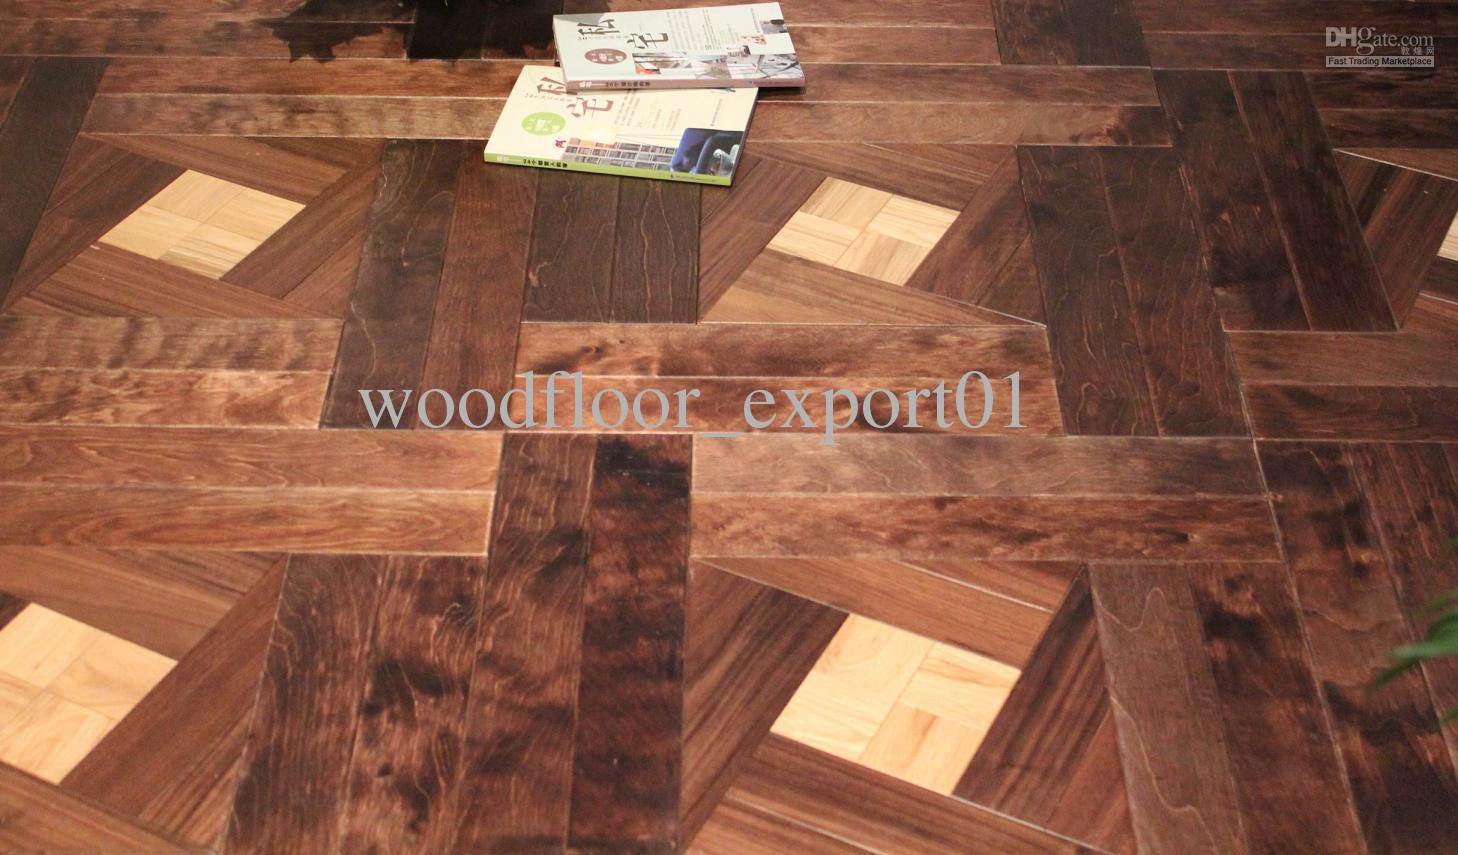 19 attractive Laminate or Engineered Hardwood Flooring which is Better 2024 free download laminate or engineered hardwood flooring which is better of solid wood flooring herringbone engineered wood floor ebony floor in wood floor made of different wood species size186019015 4mm a